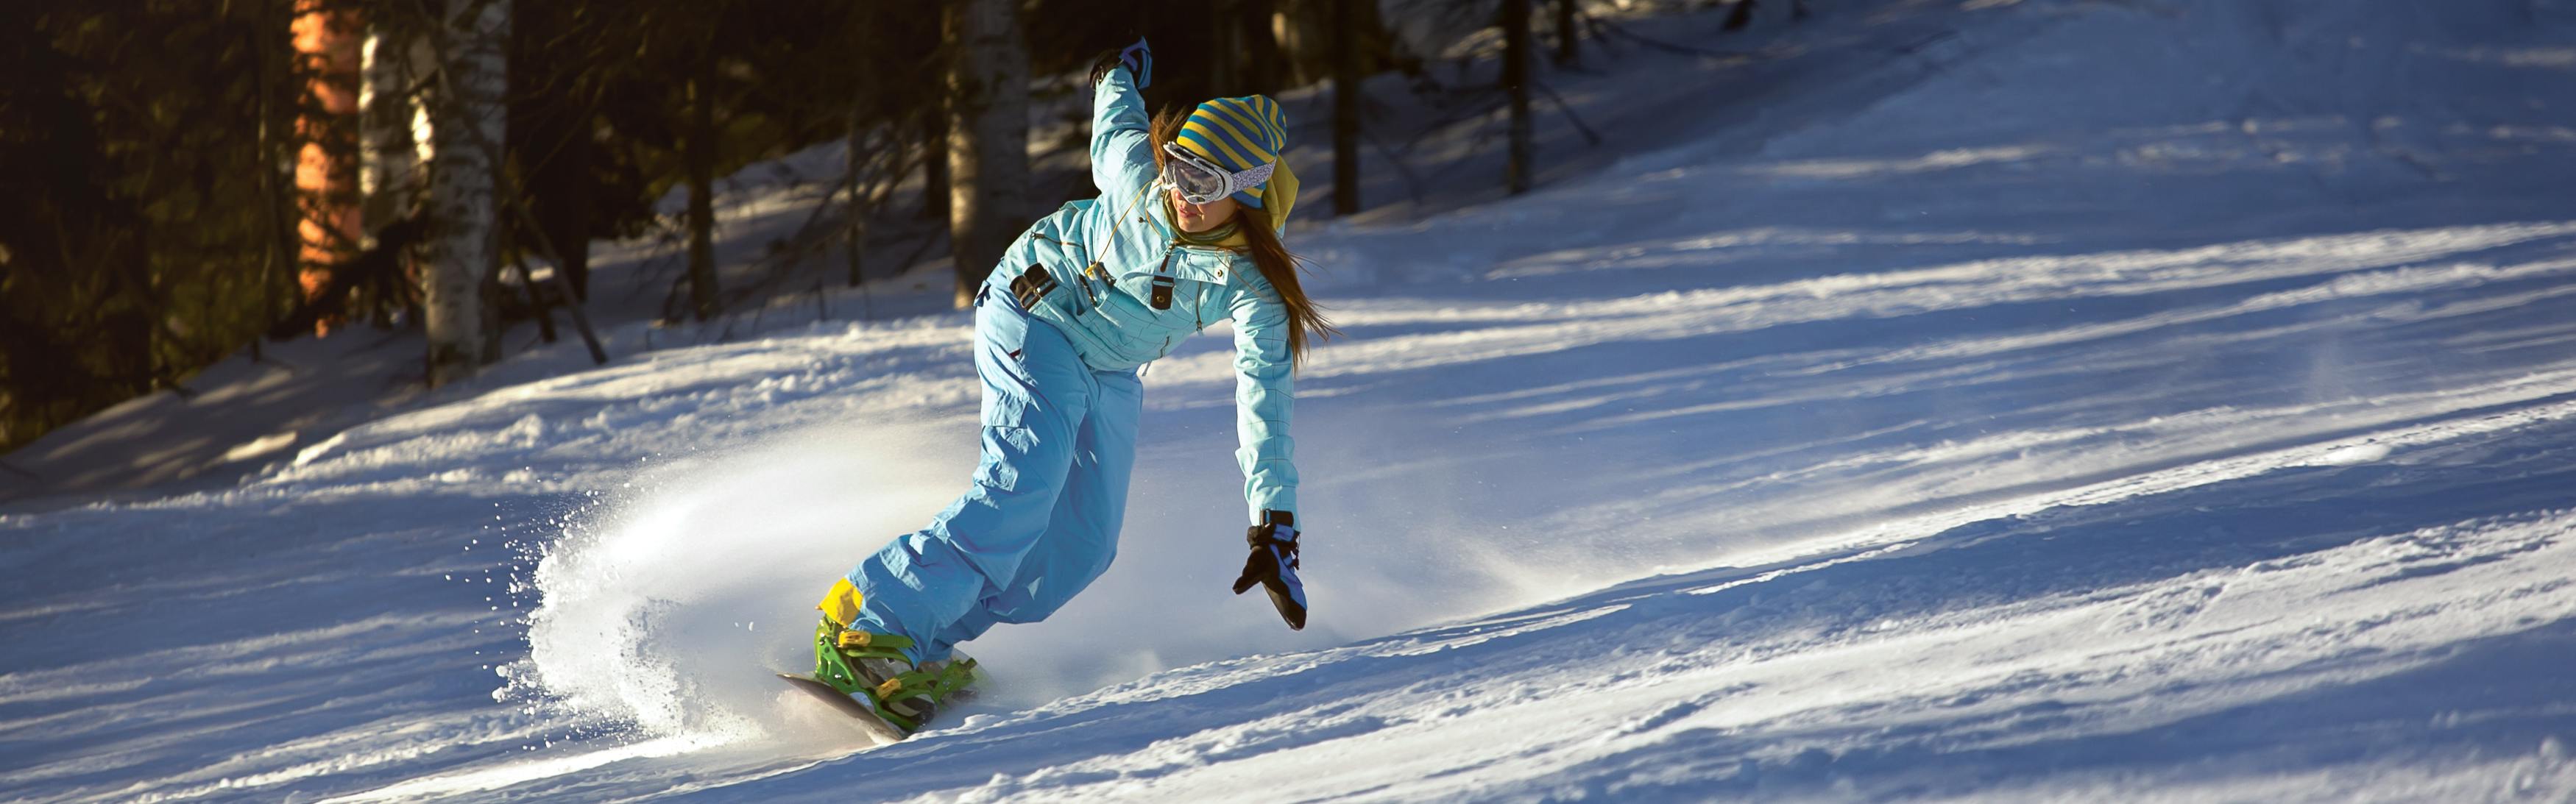 A female snowboarder carves down an icy slope on her snowboard. 